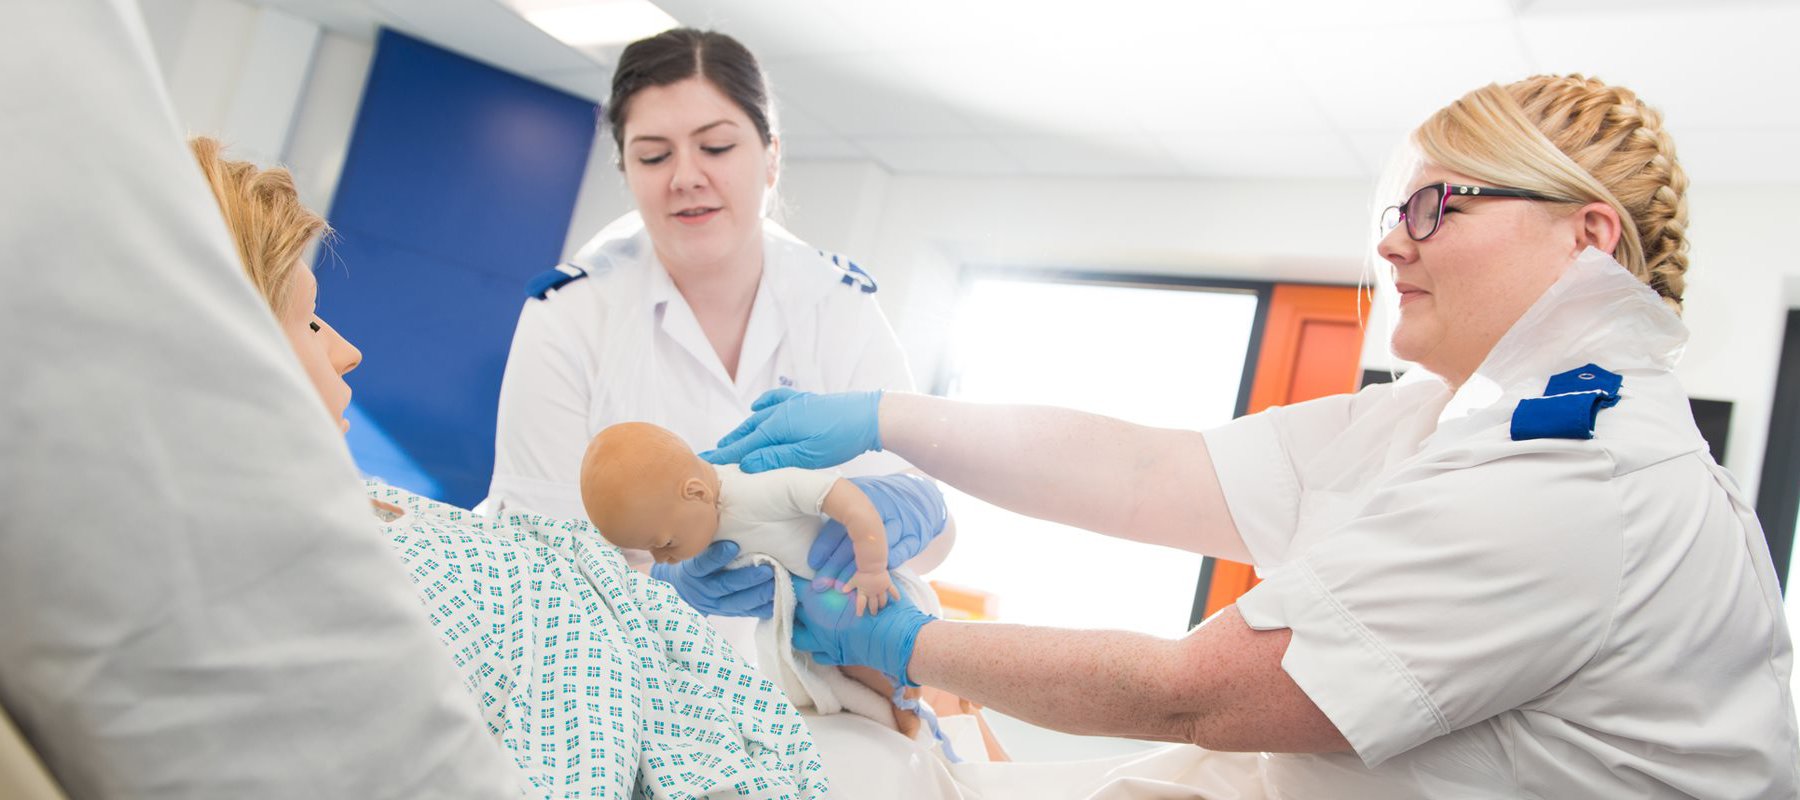 BSc (Hons) Midwifery Course | University of Hull